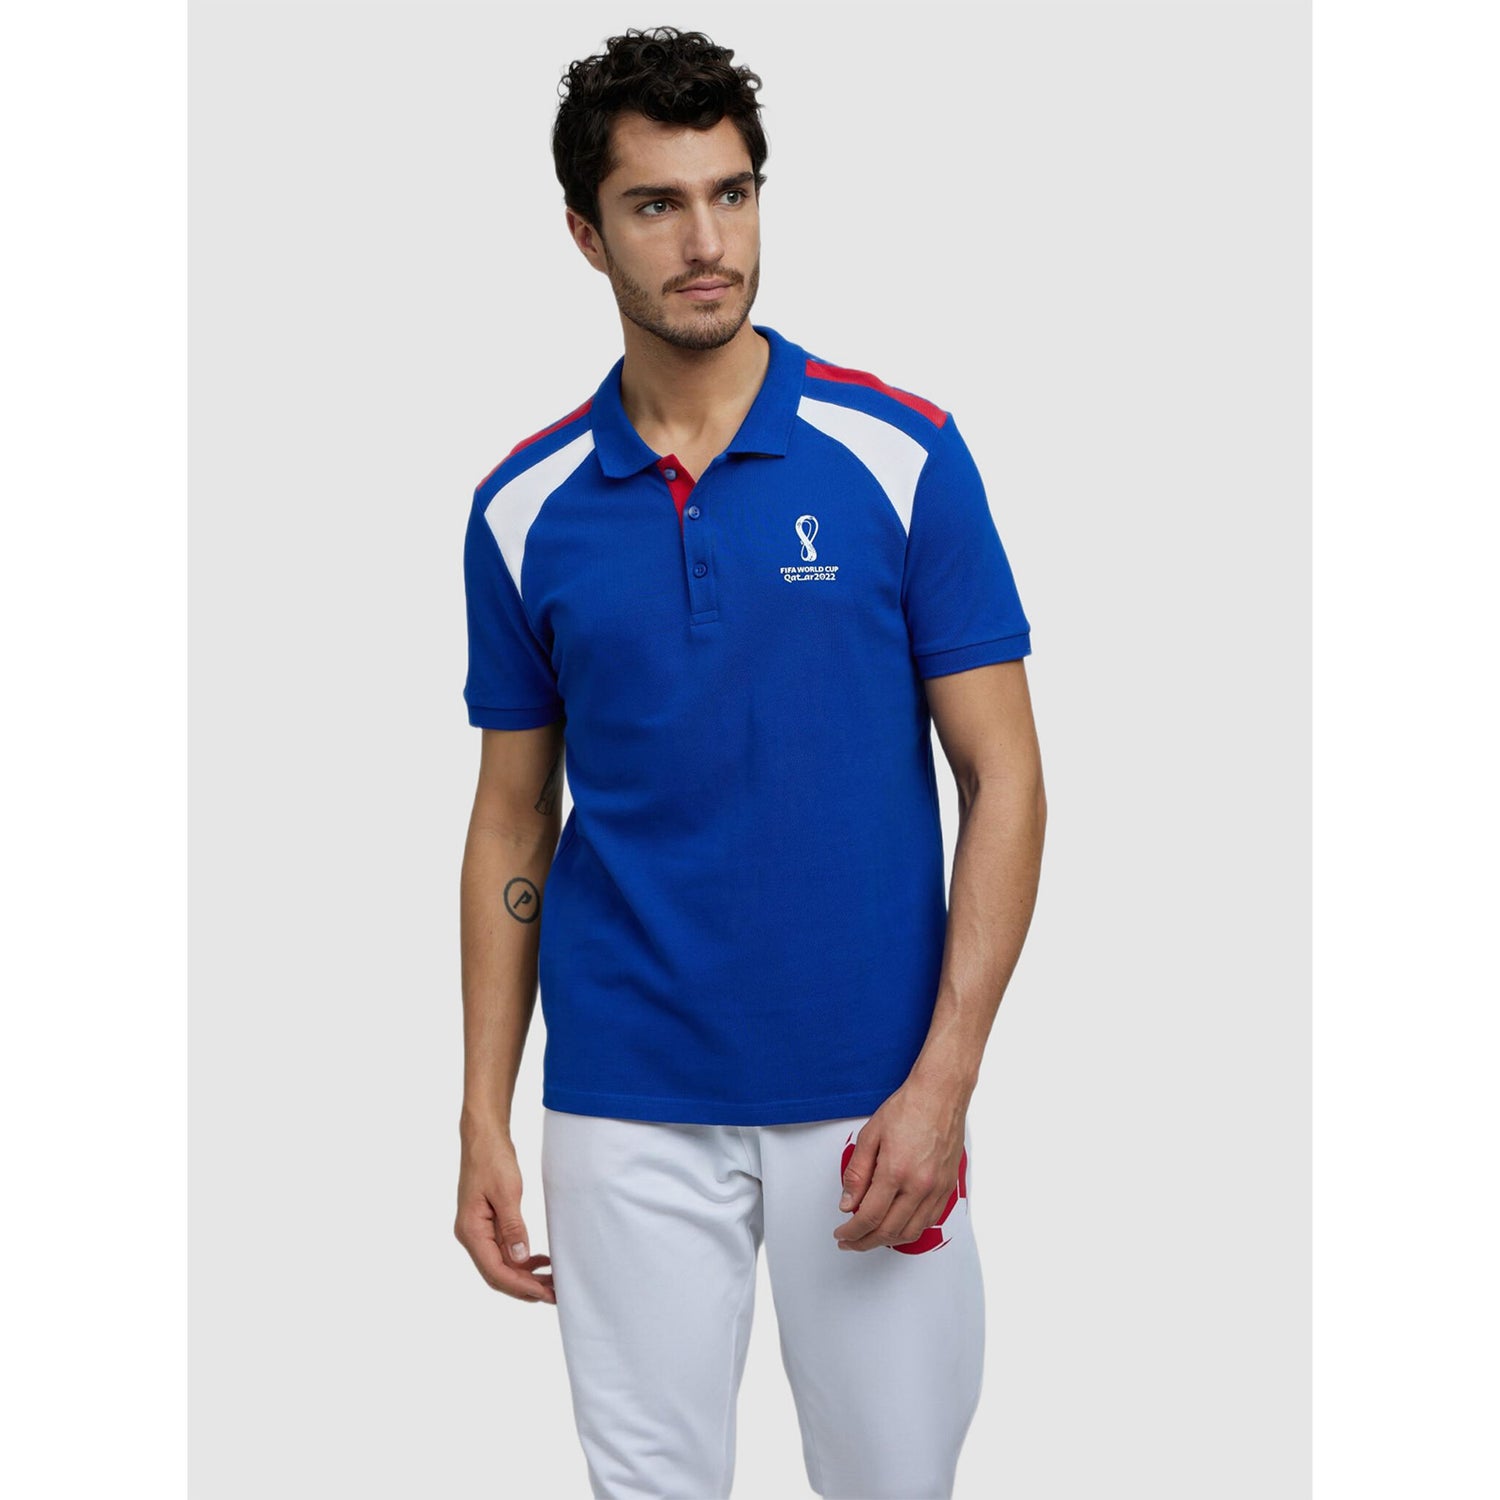 FIFA - Blue and White Printed Polo Collar Cotton T-shirt (LCEFIFAF1)